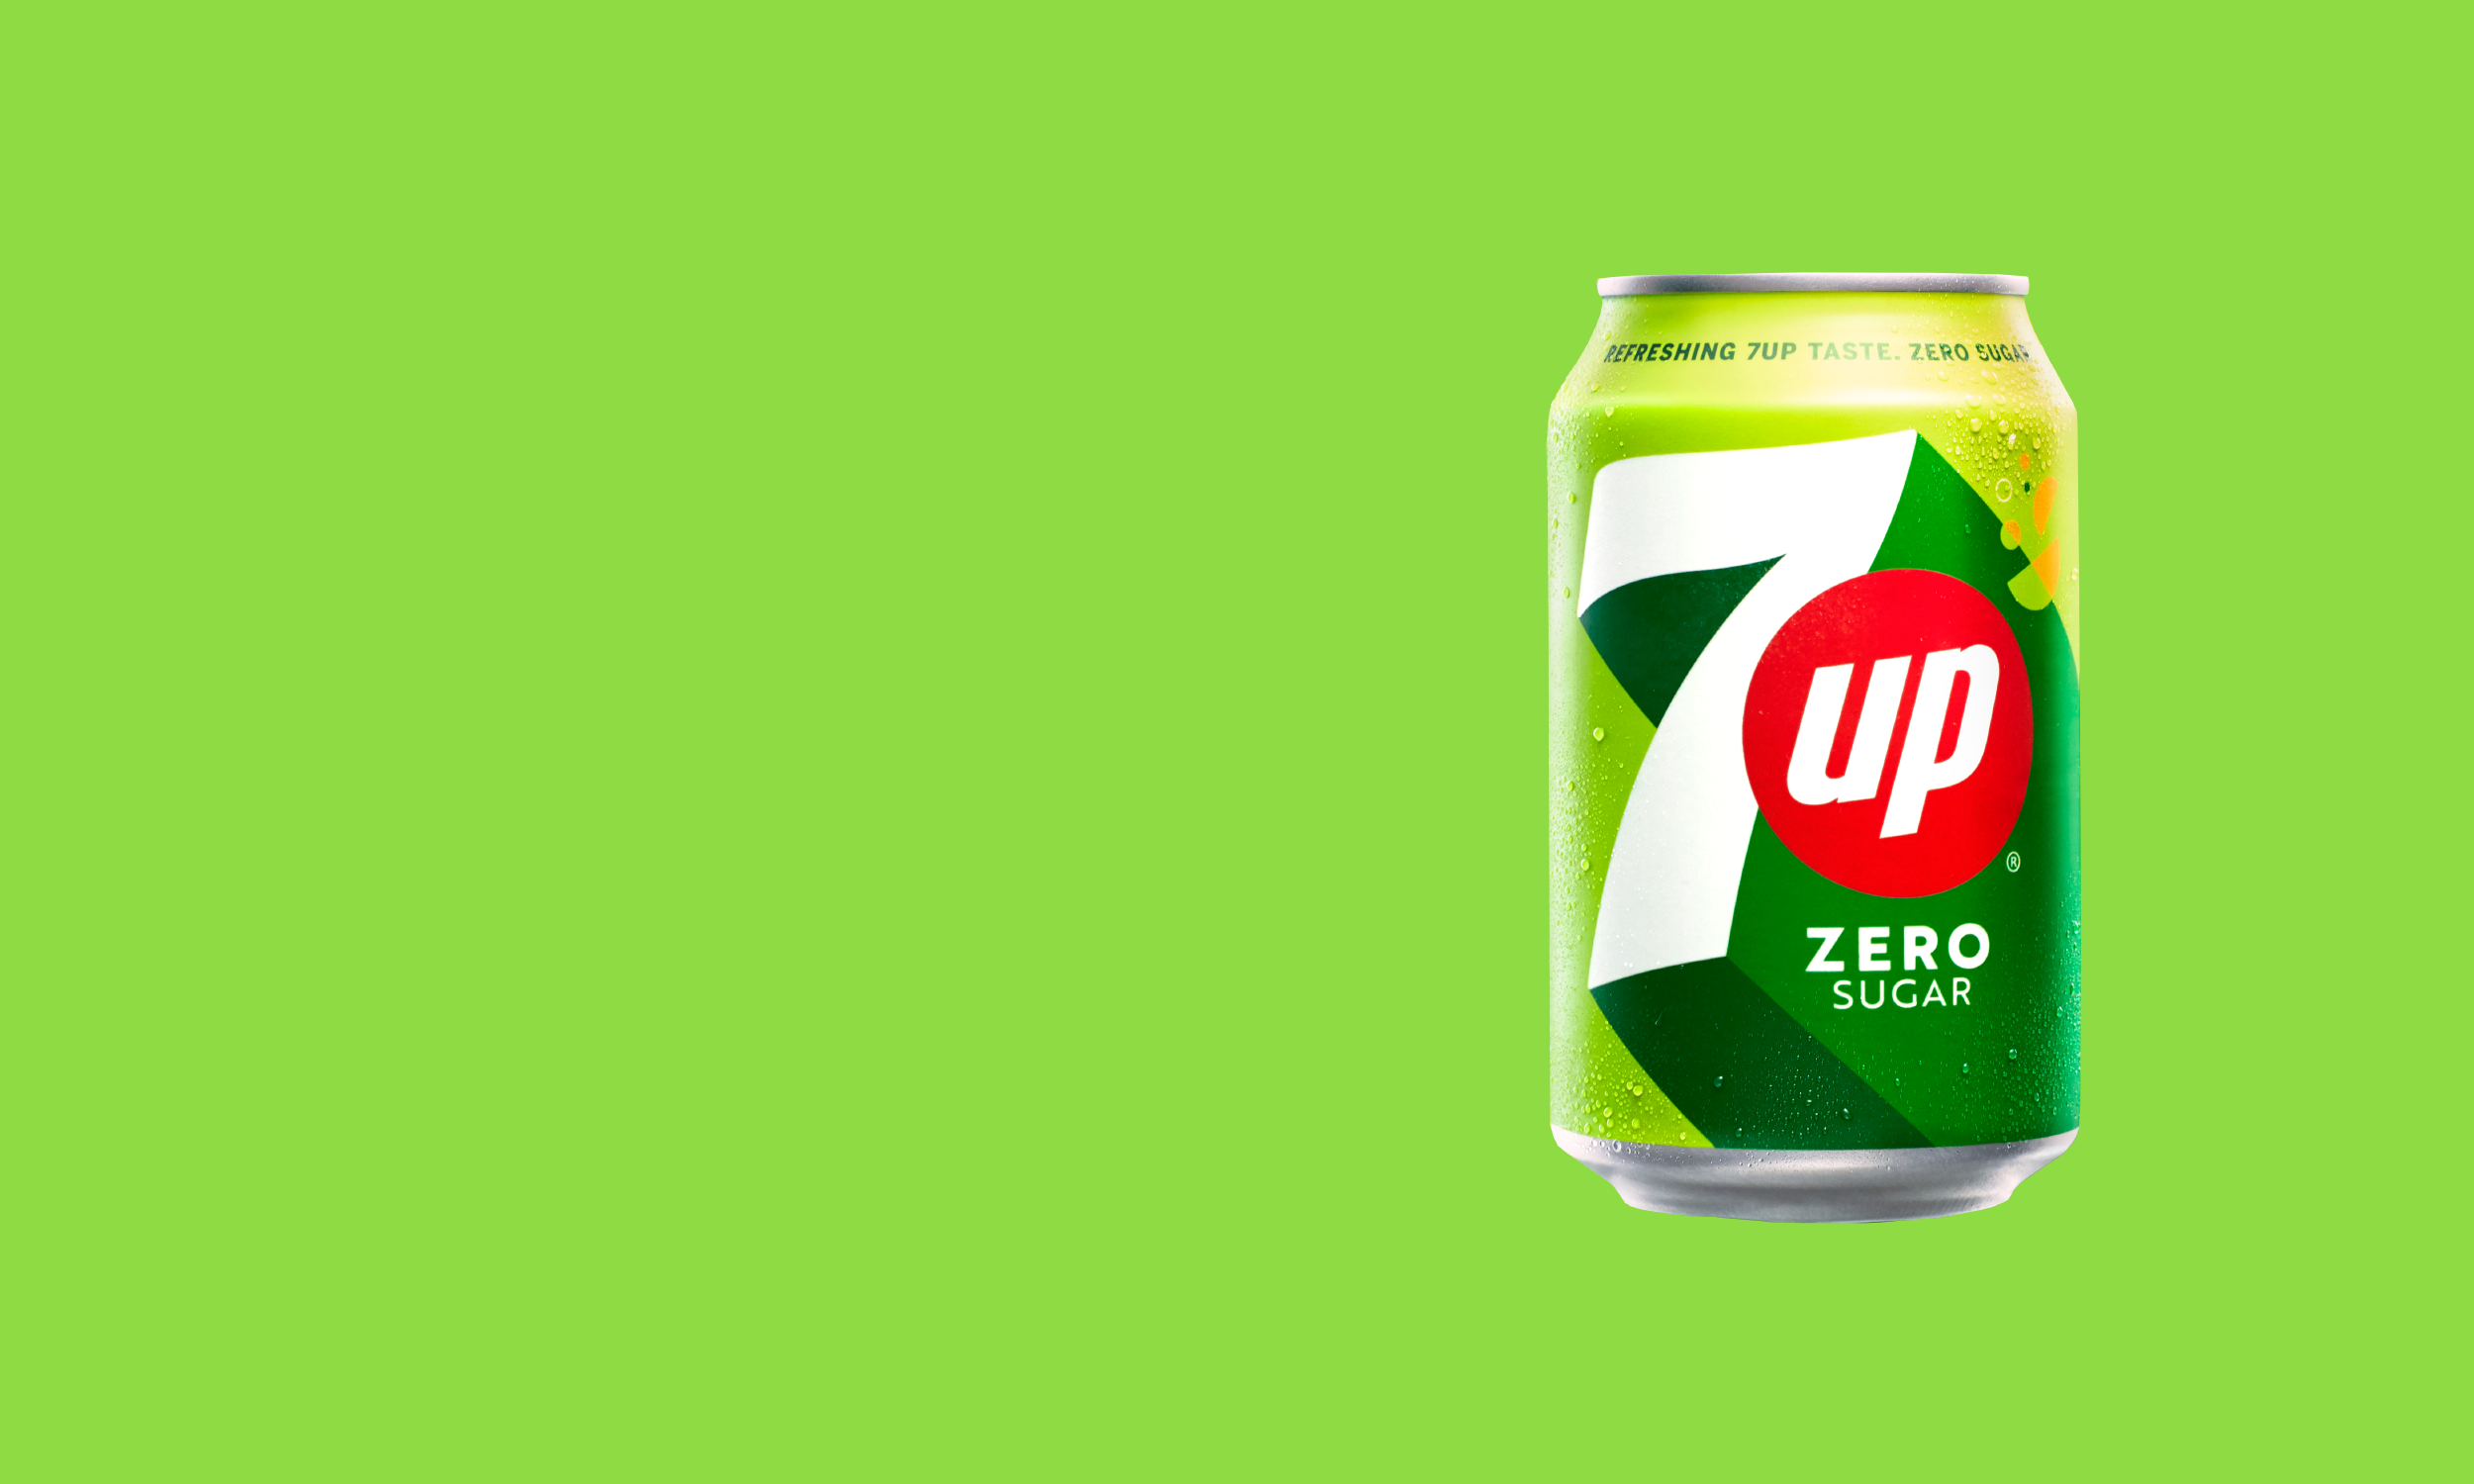 Can of 7up Zero Sugar